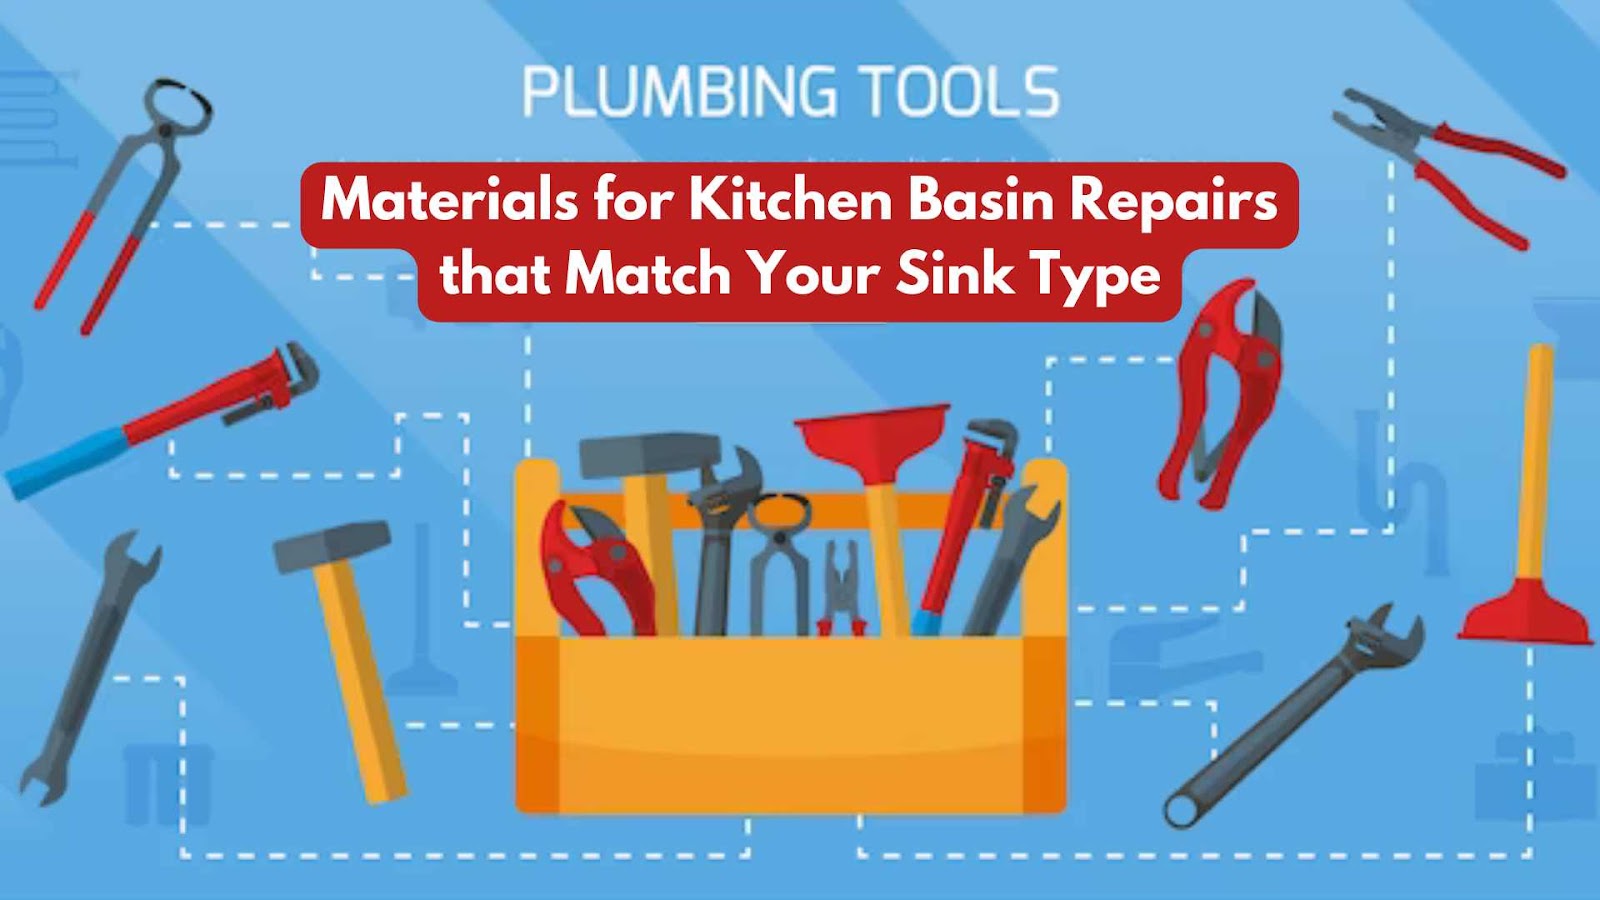 Materials for Kitchen Basin Repairs that Match Your Sink Type